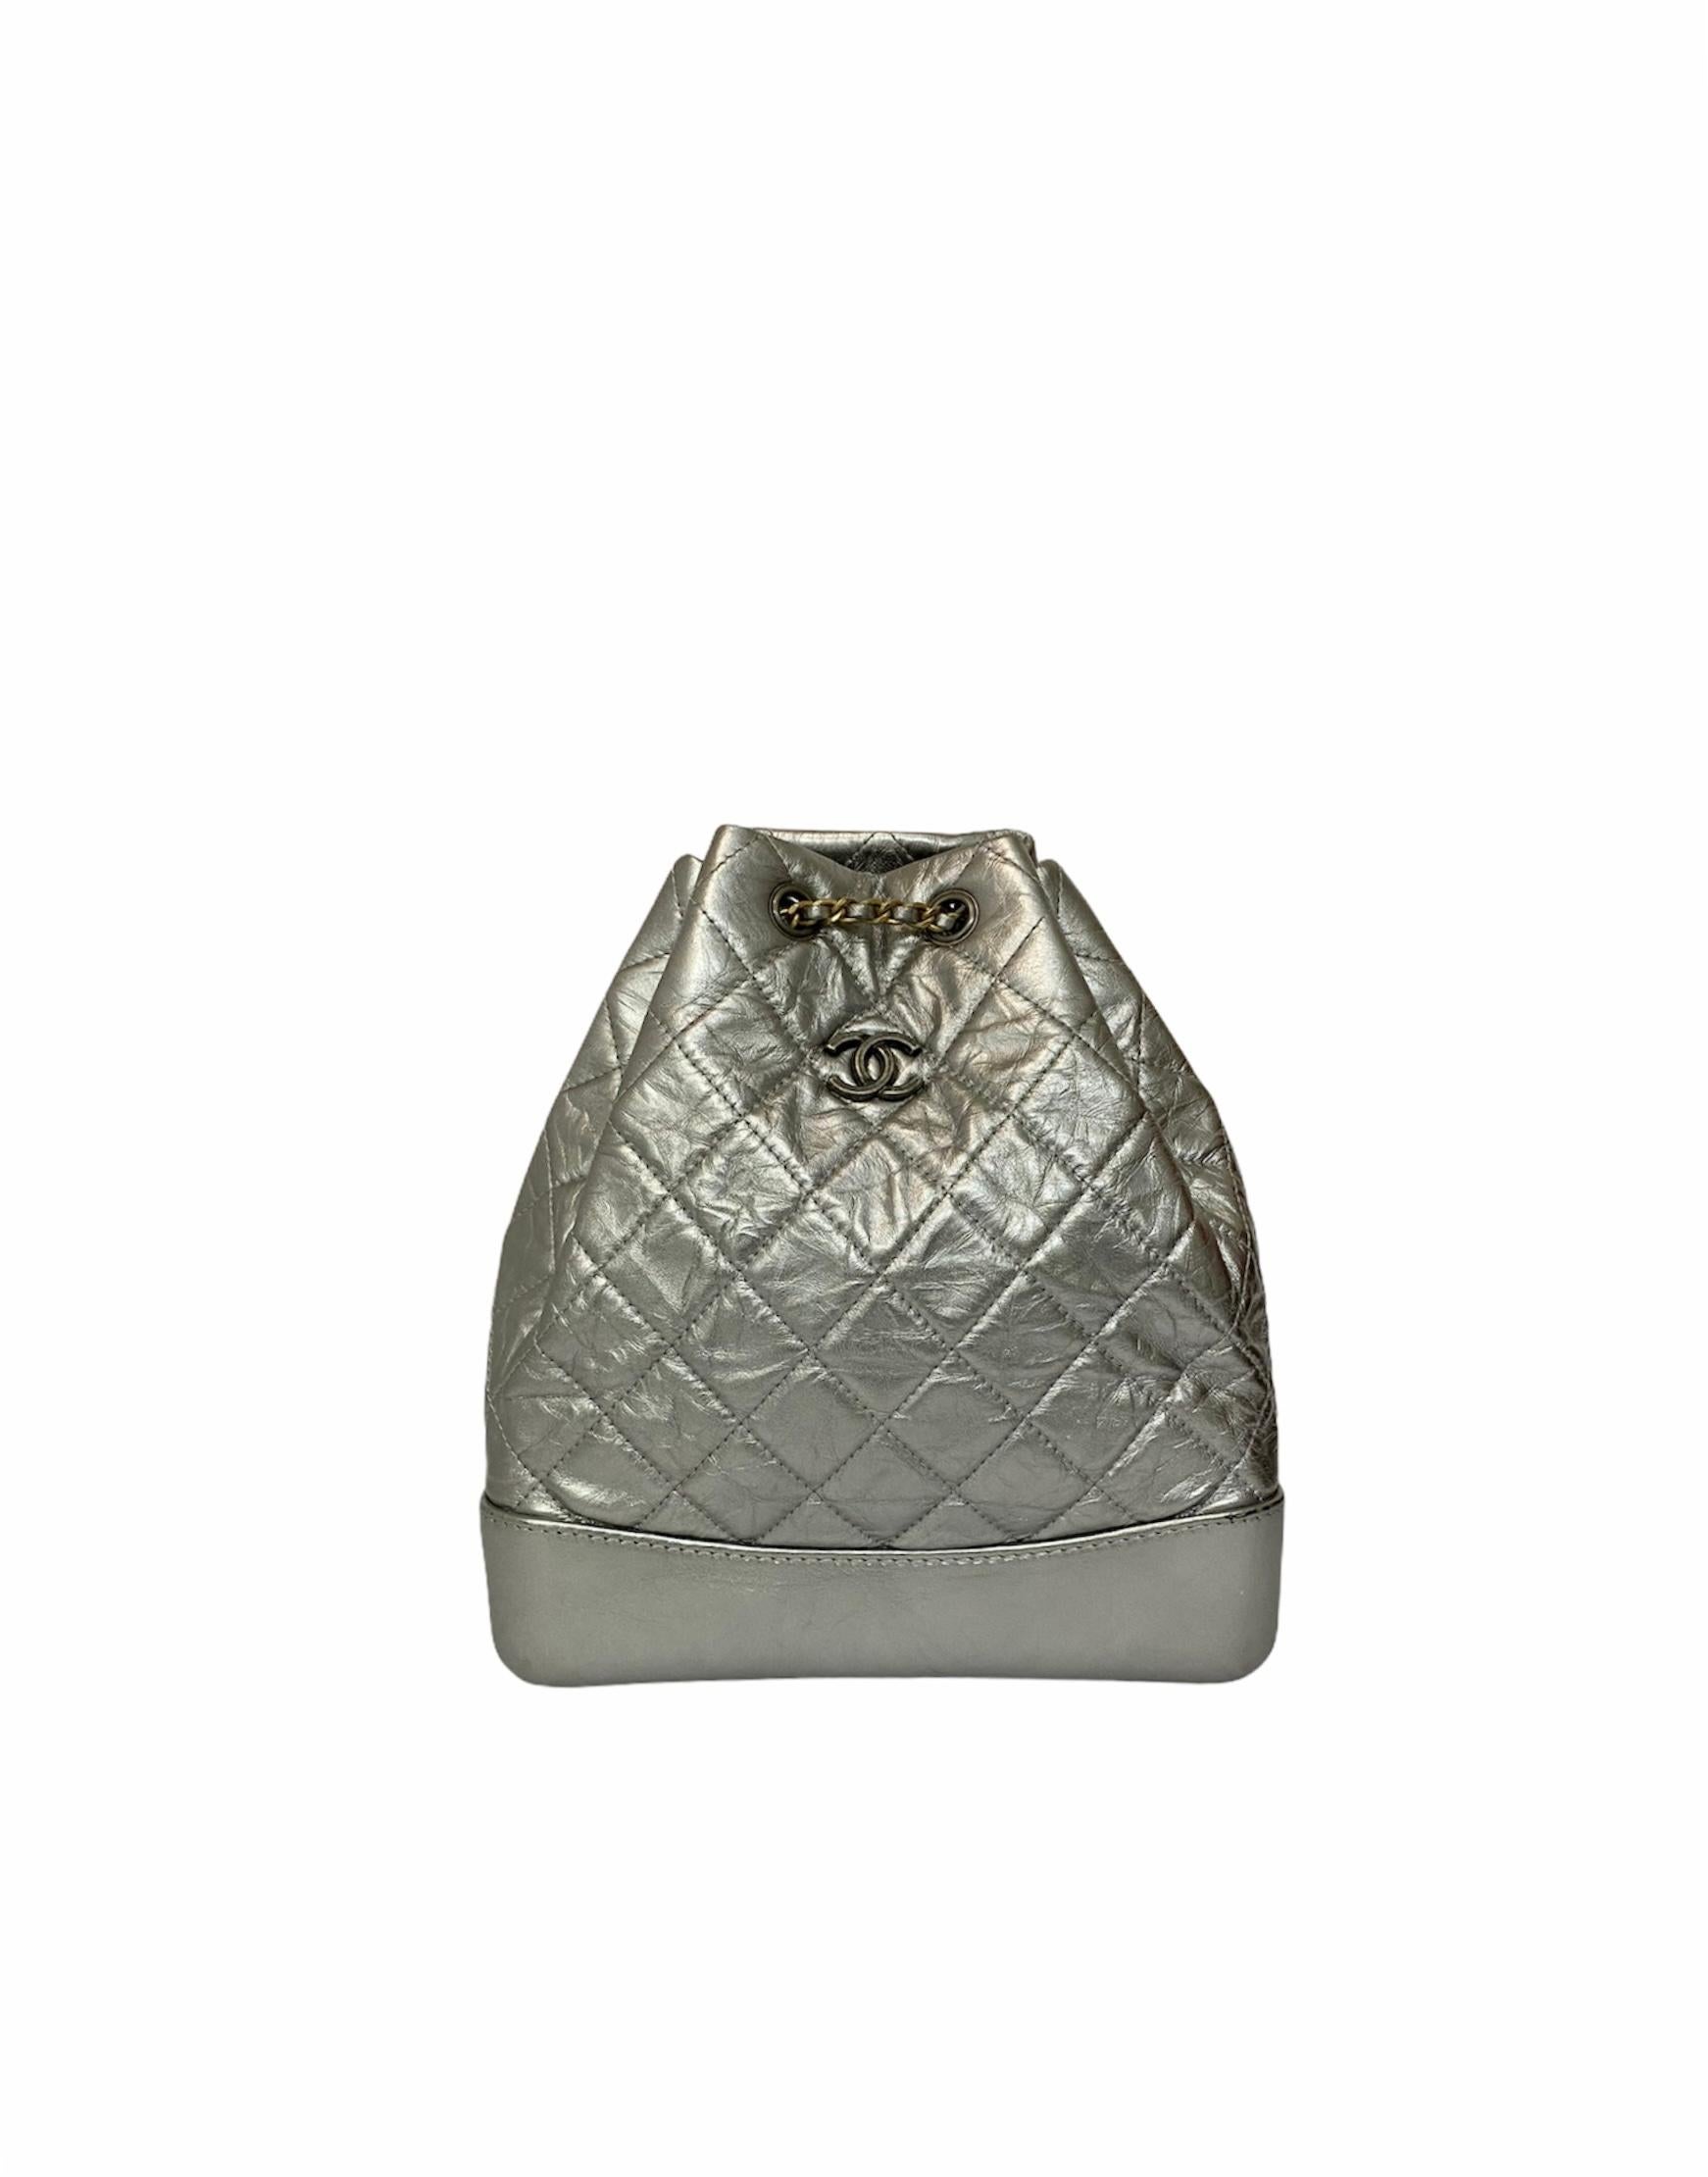 Chanel Silver Leather Backpack 4